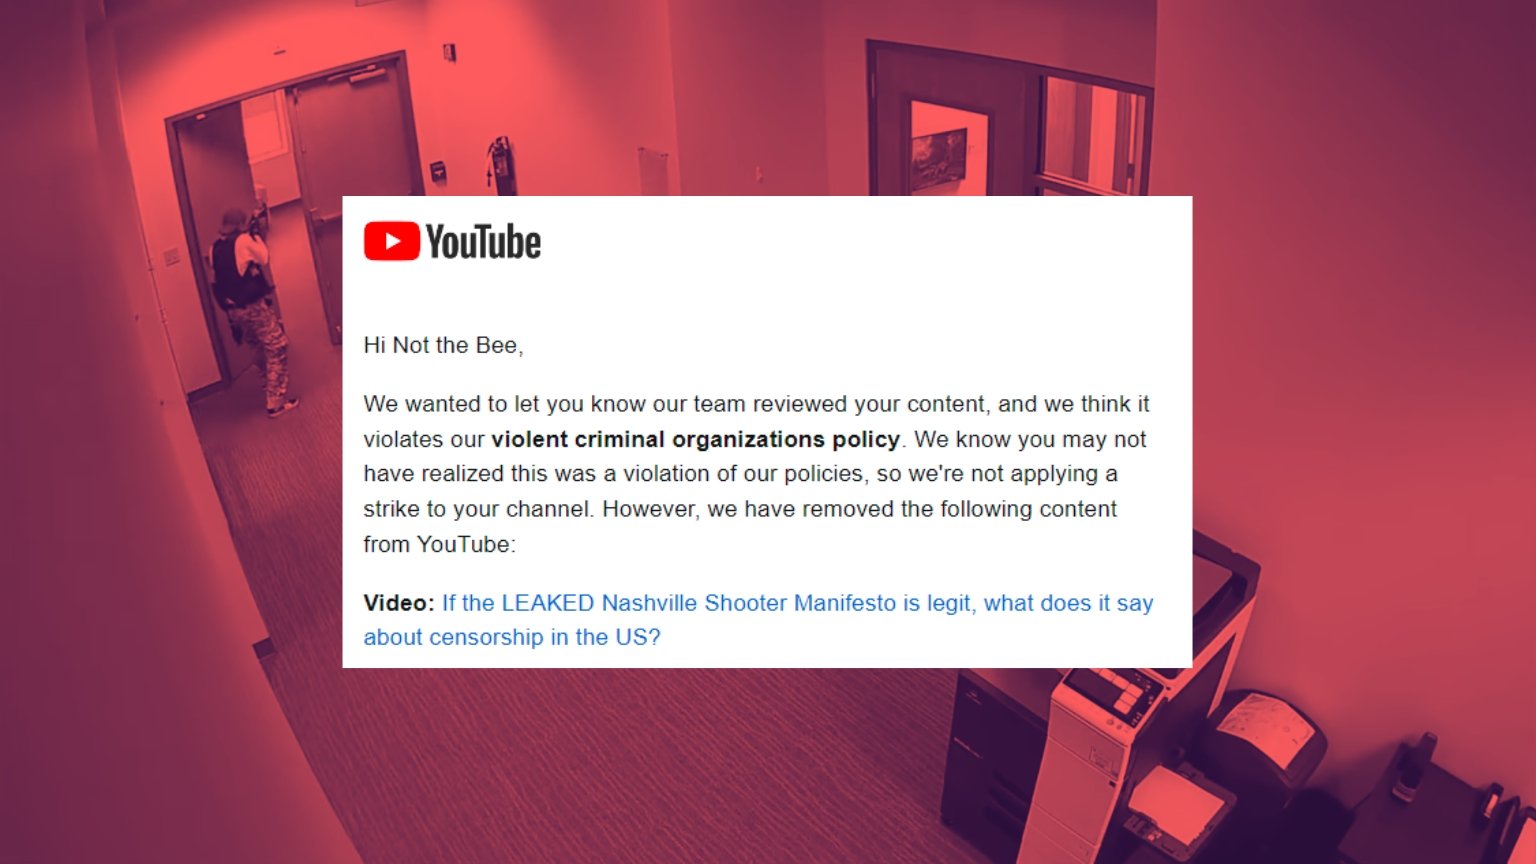 YouTube Continues To Censor News Reporting on the Nashville Shooter Manifesto